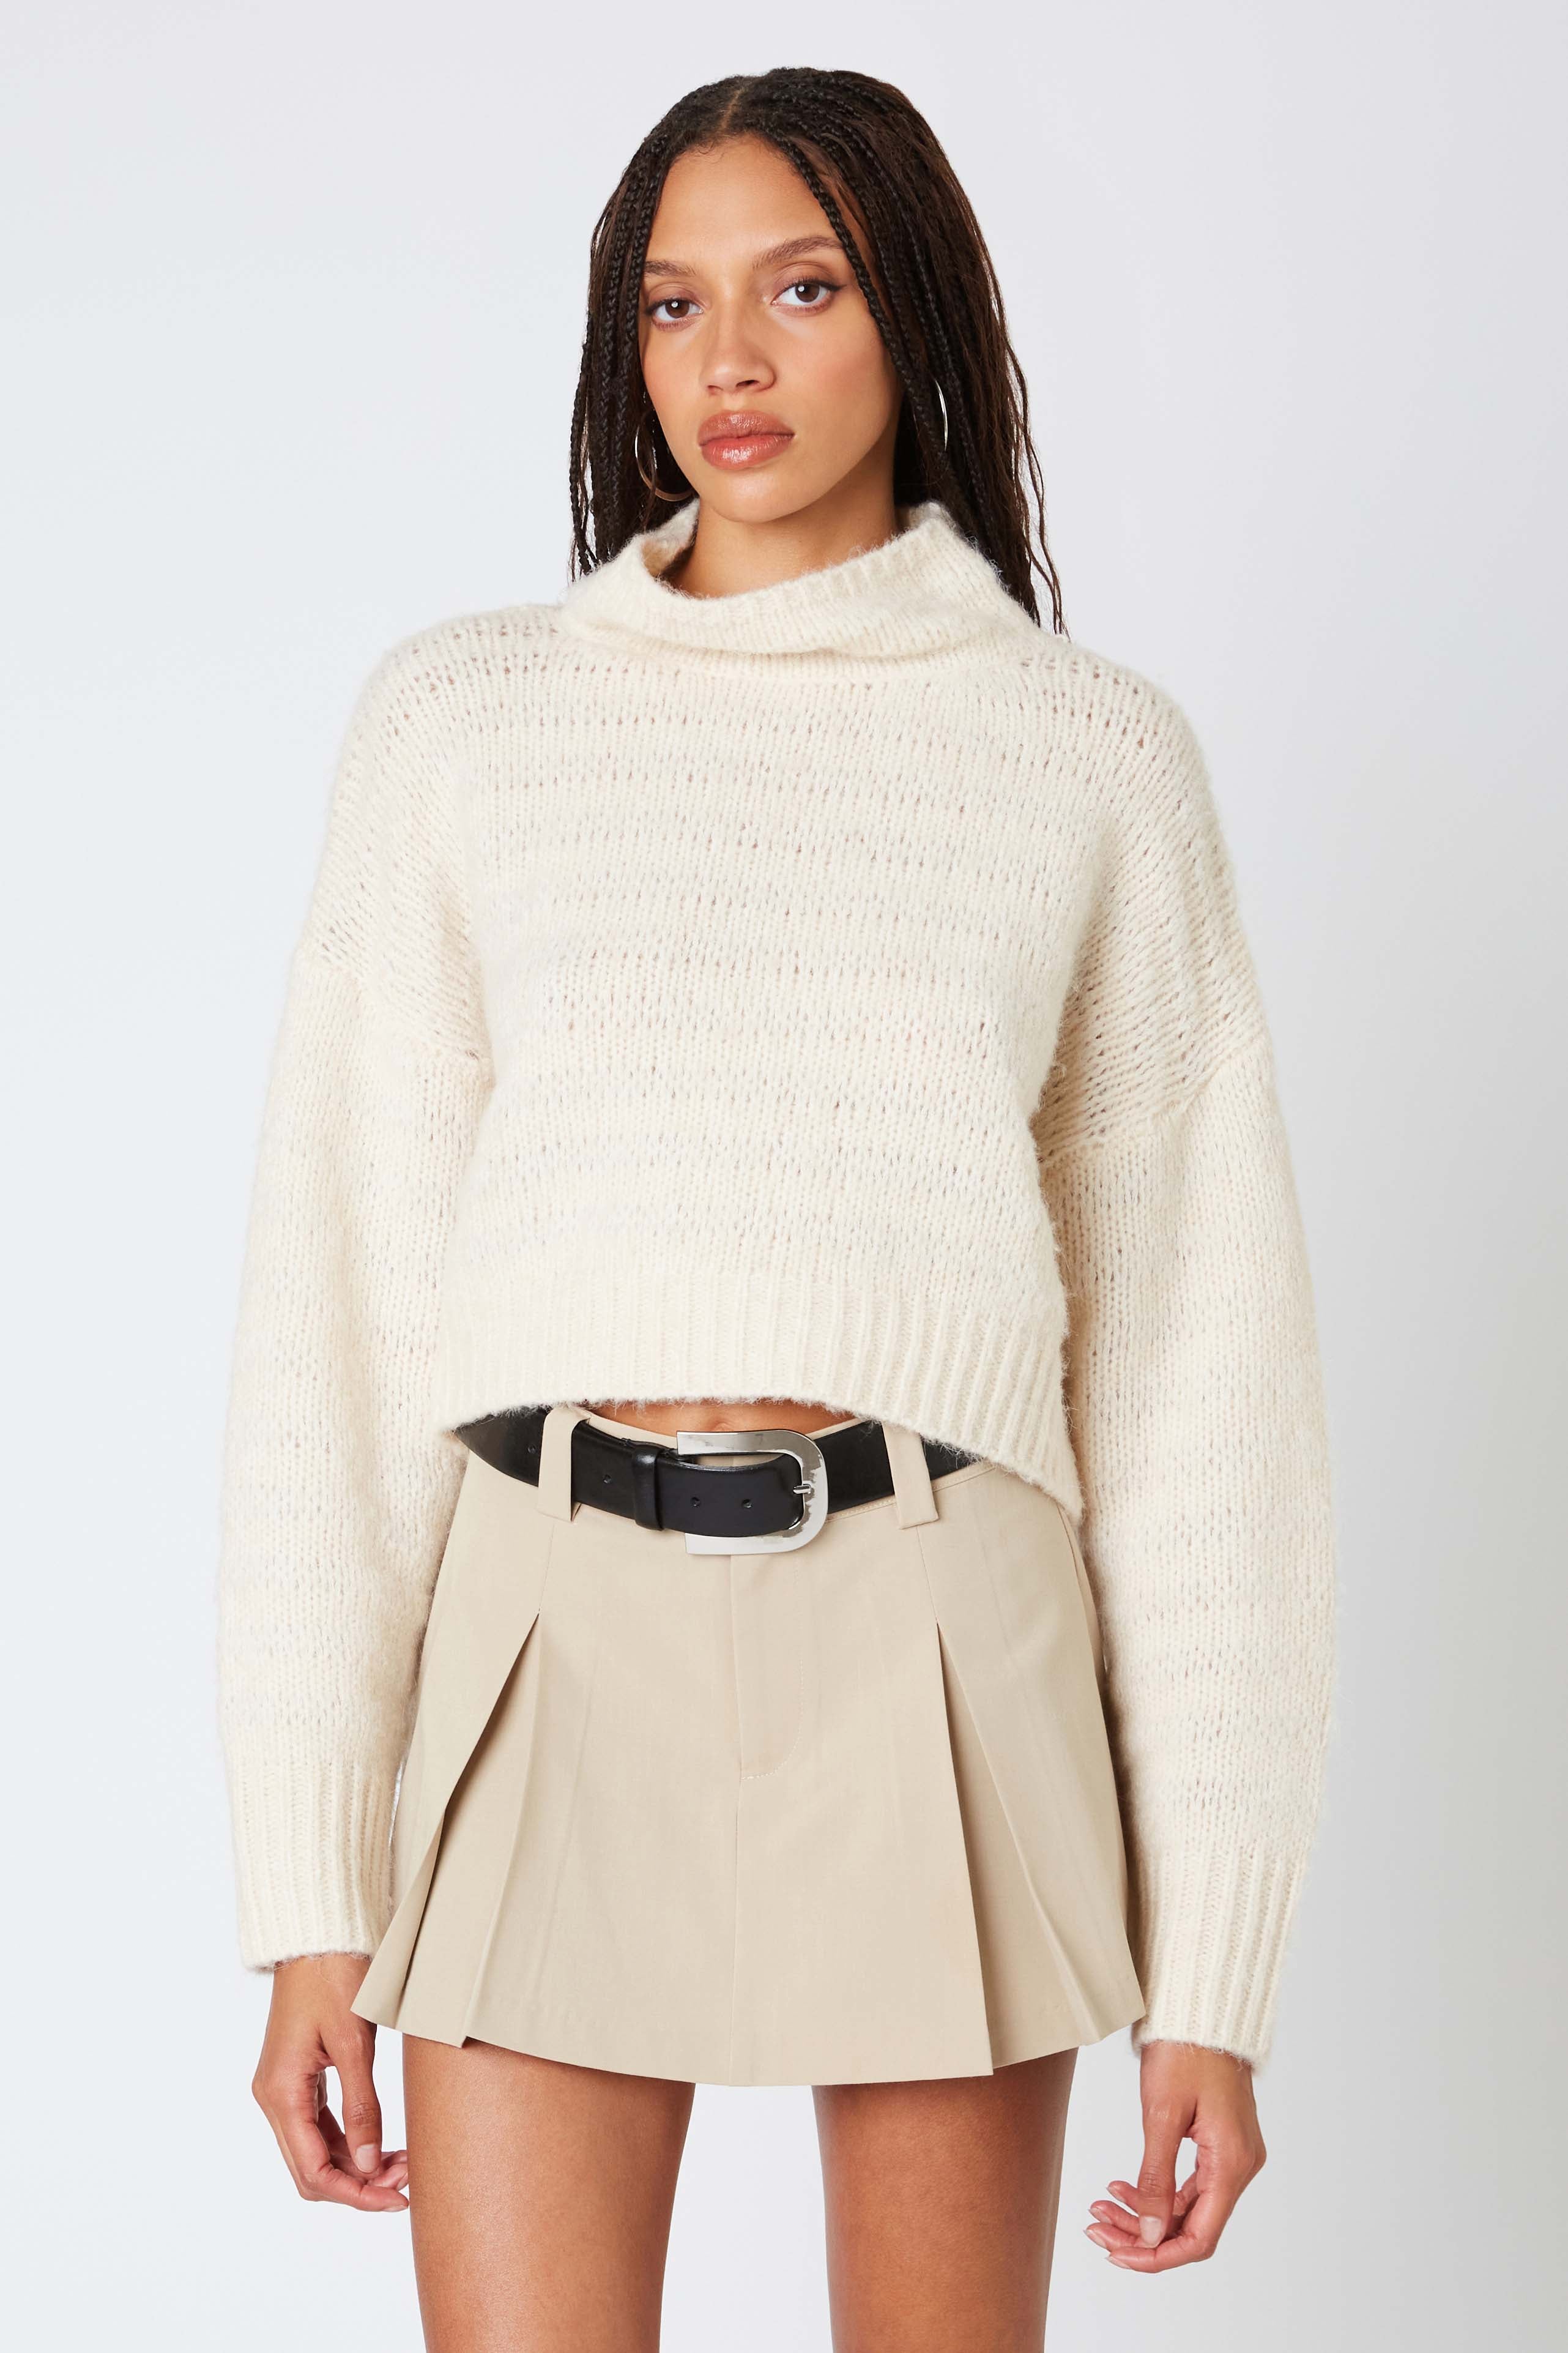 Mockneck Sweater in Oatmeal Front View